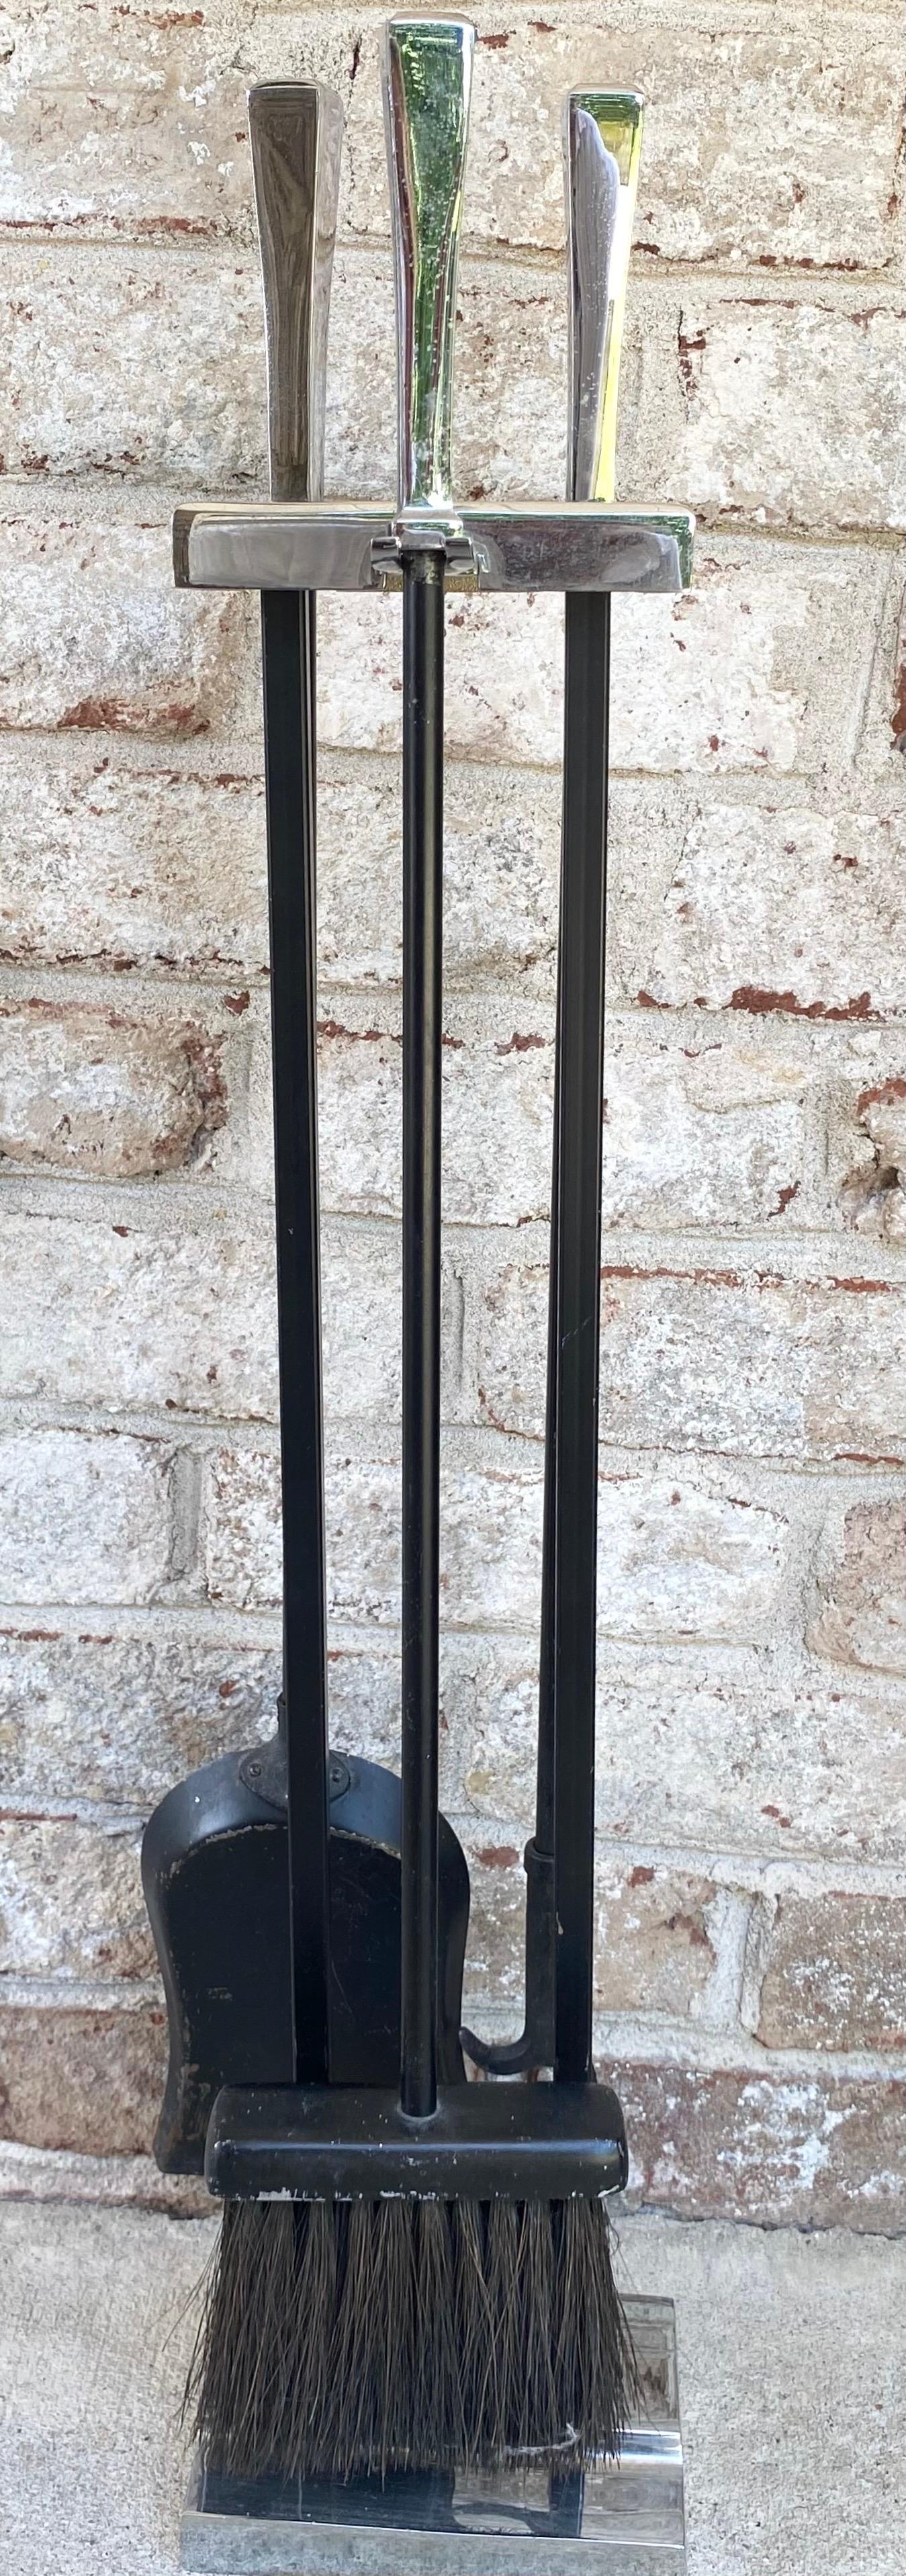 Handsome set of iron and chrome fireplace tools.

The measurements for the stand is 26